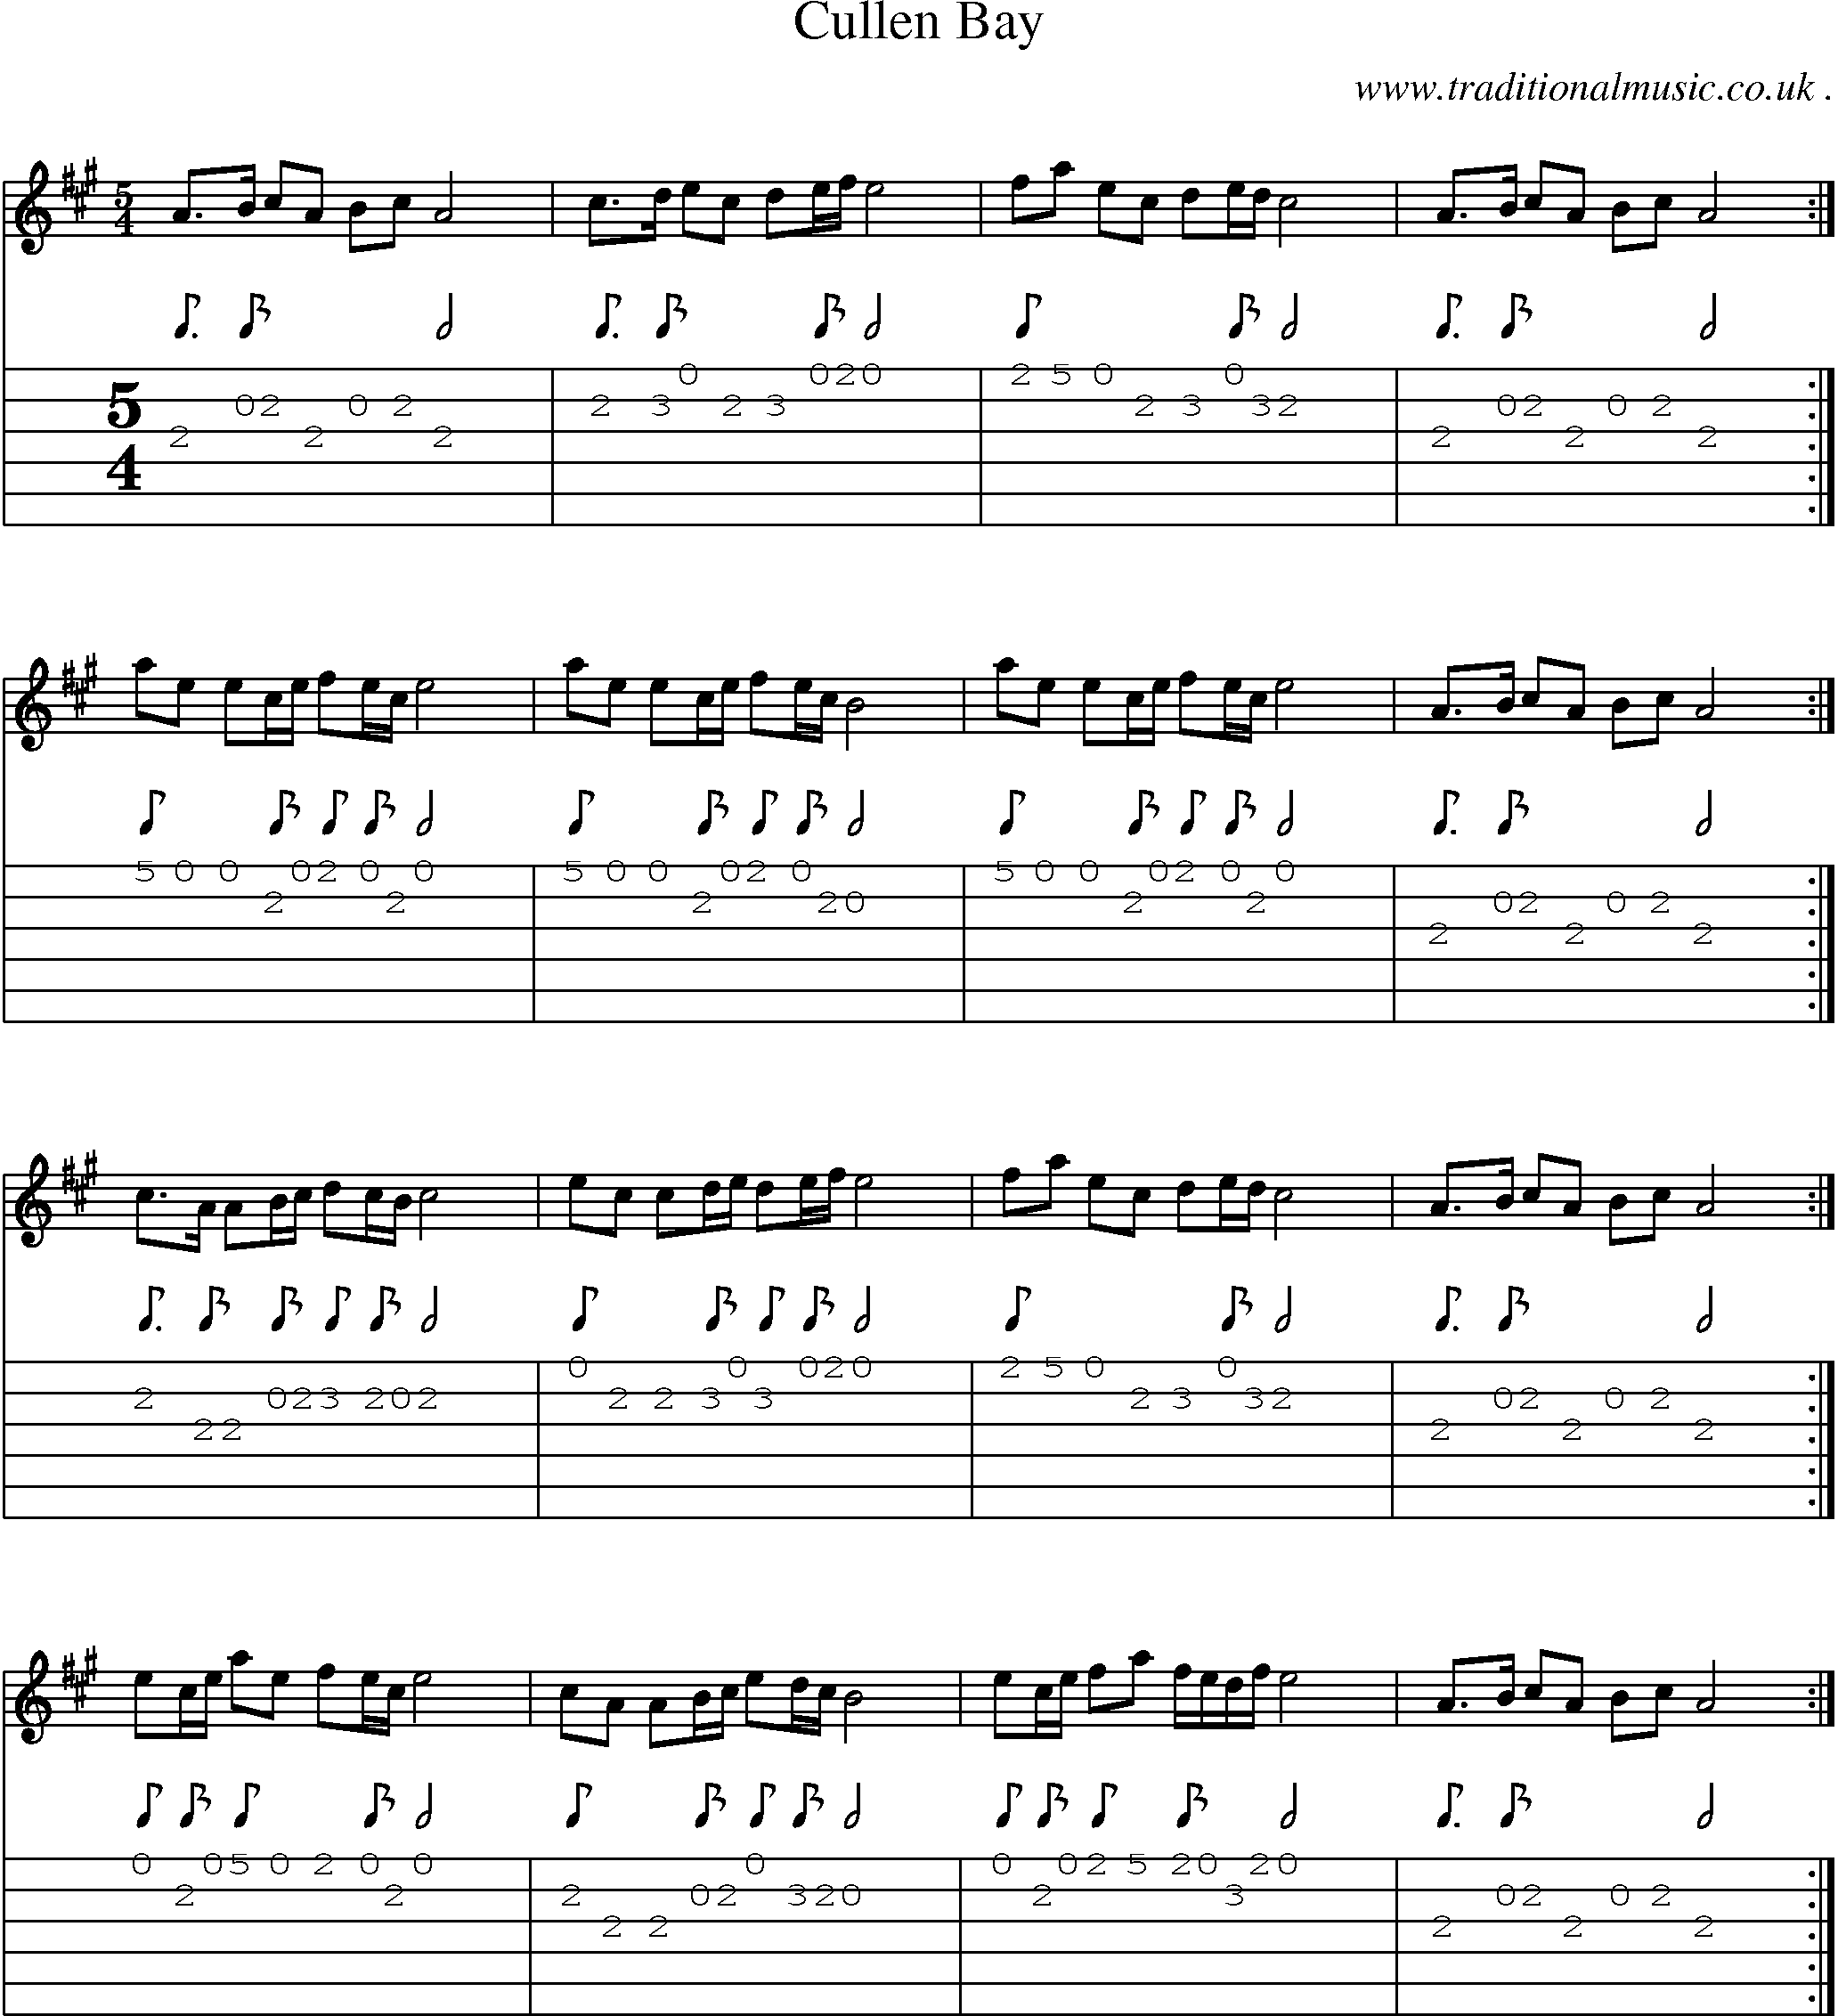 Sheet-music  score, Chords and Guitar Tabs for Cullen Bay